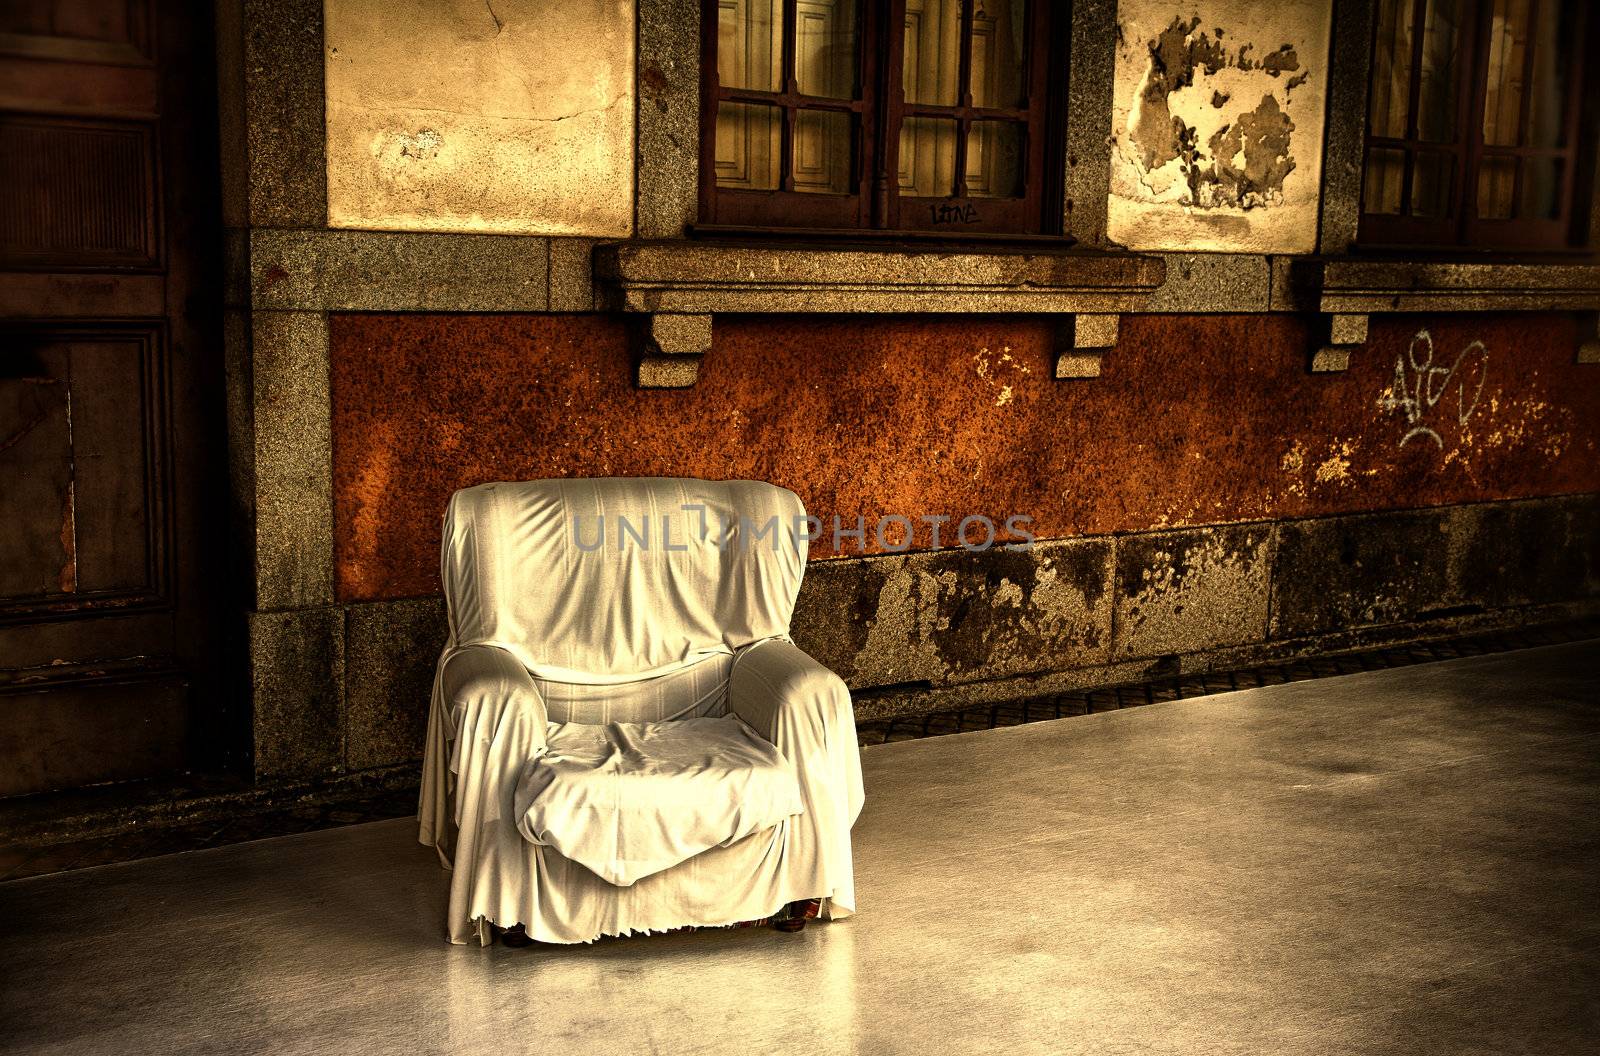 Free armchair in the street by ABCDK